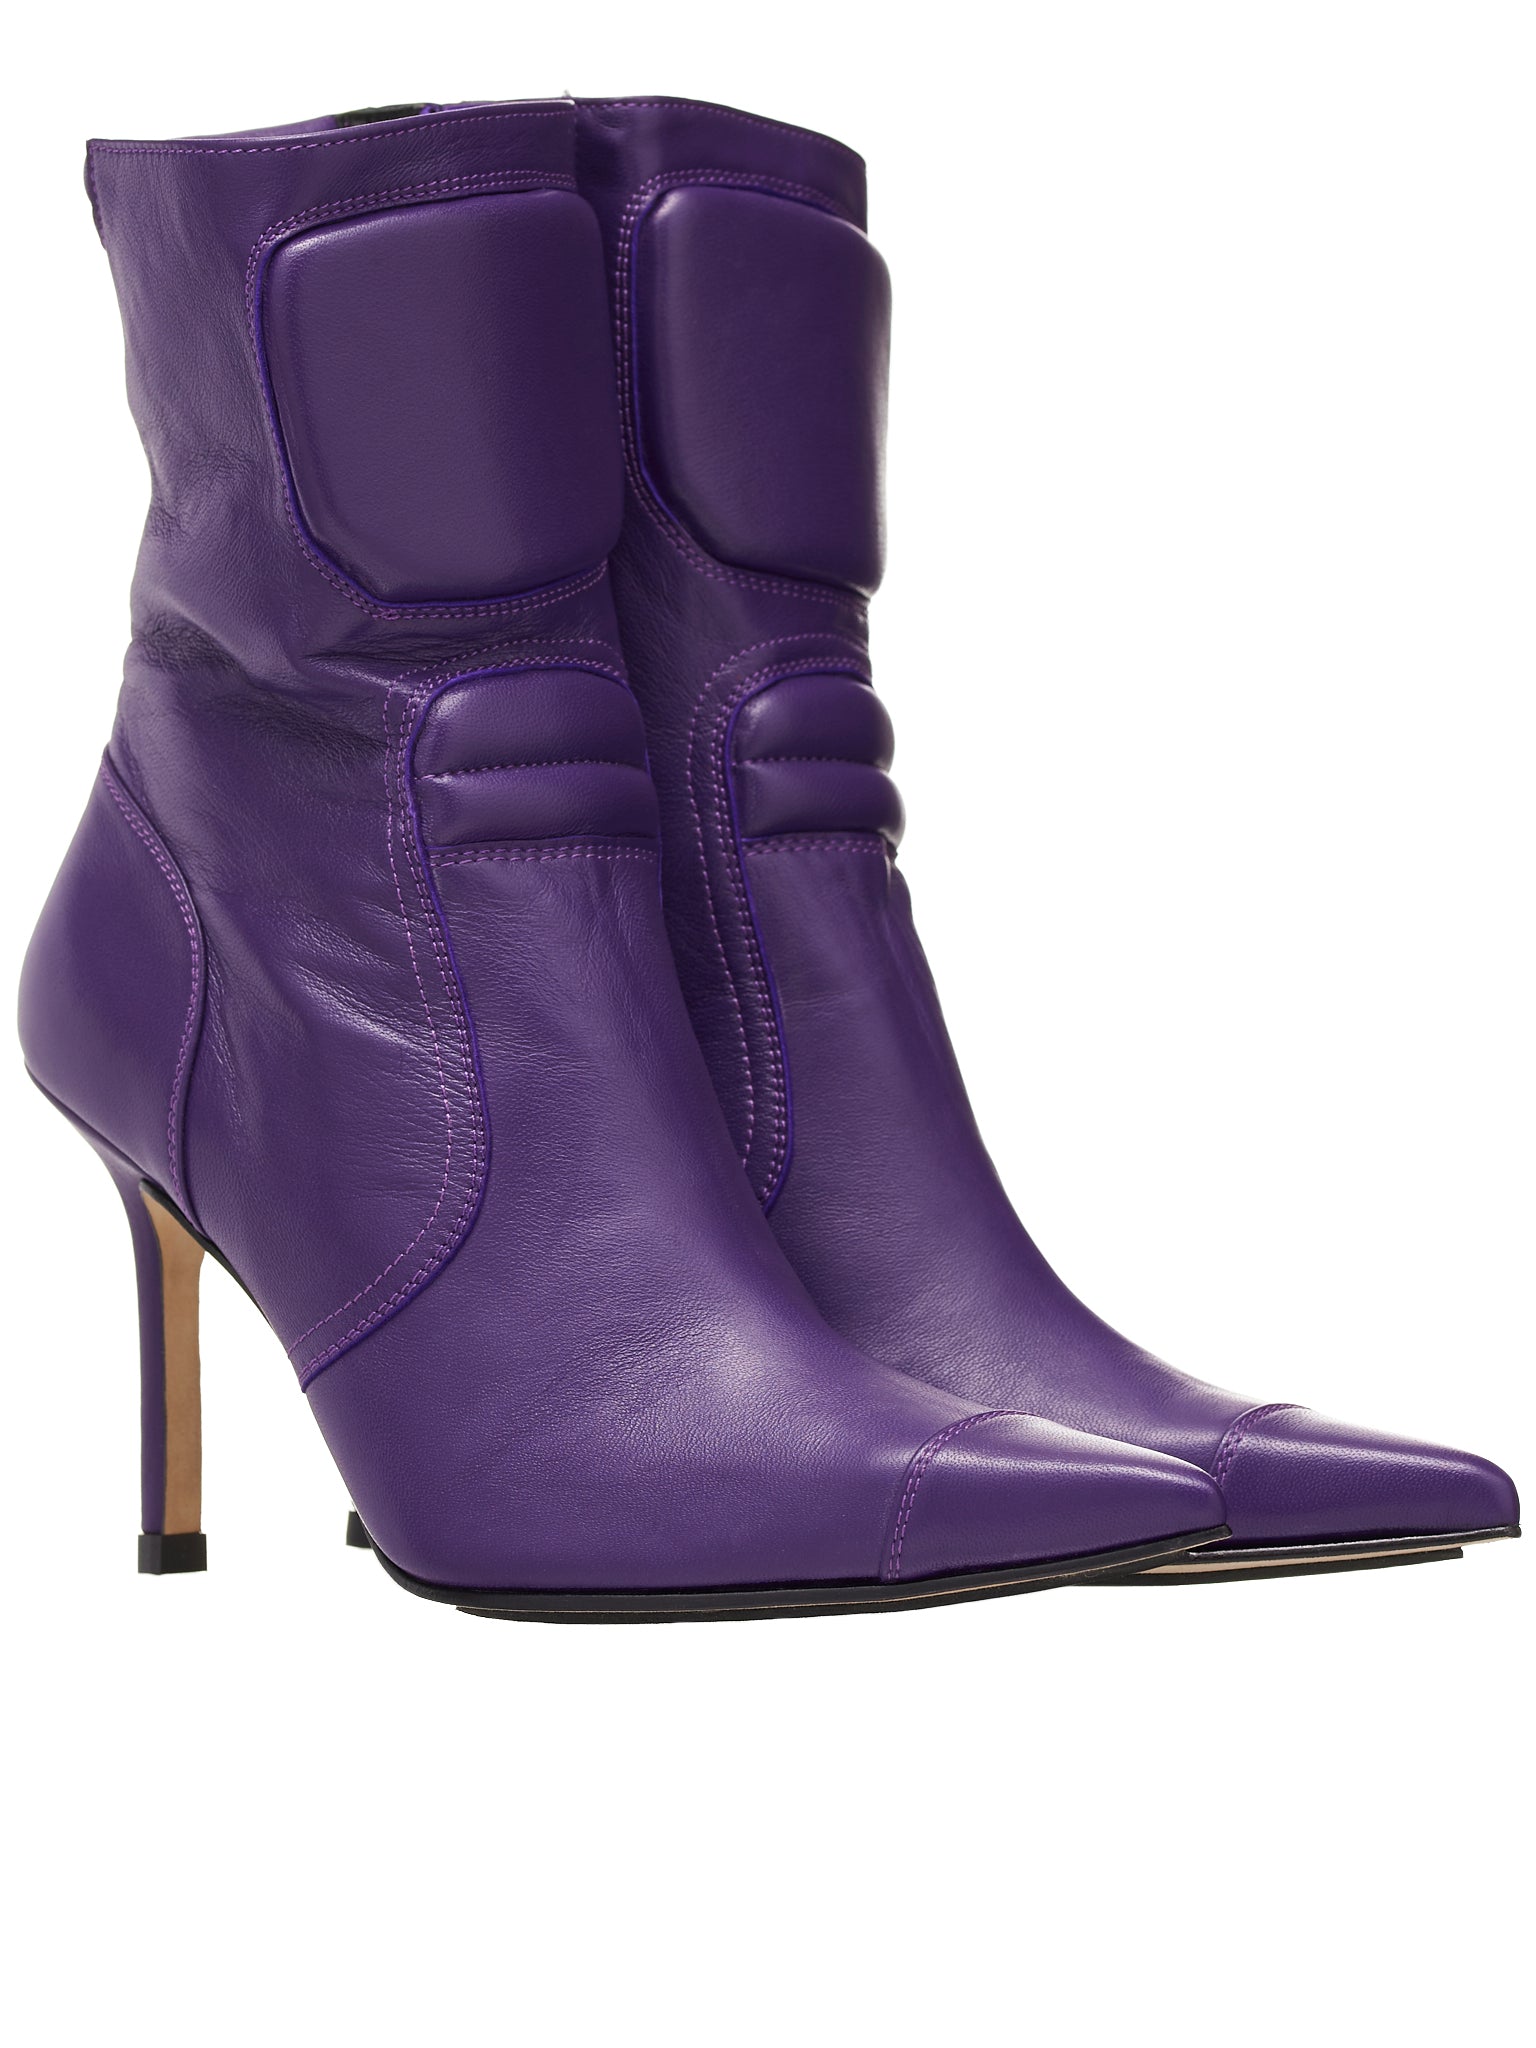 Padded Leather Boots (WW-SHOES-5-PURPLE)